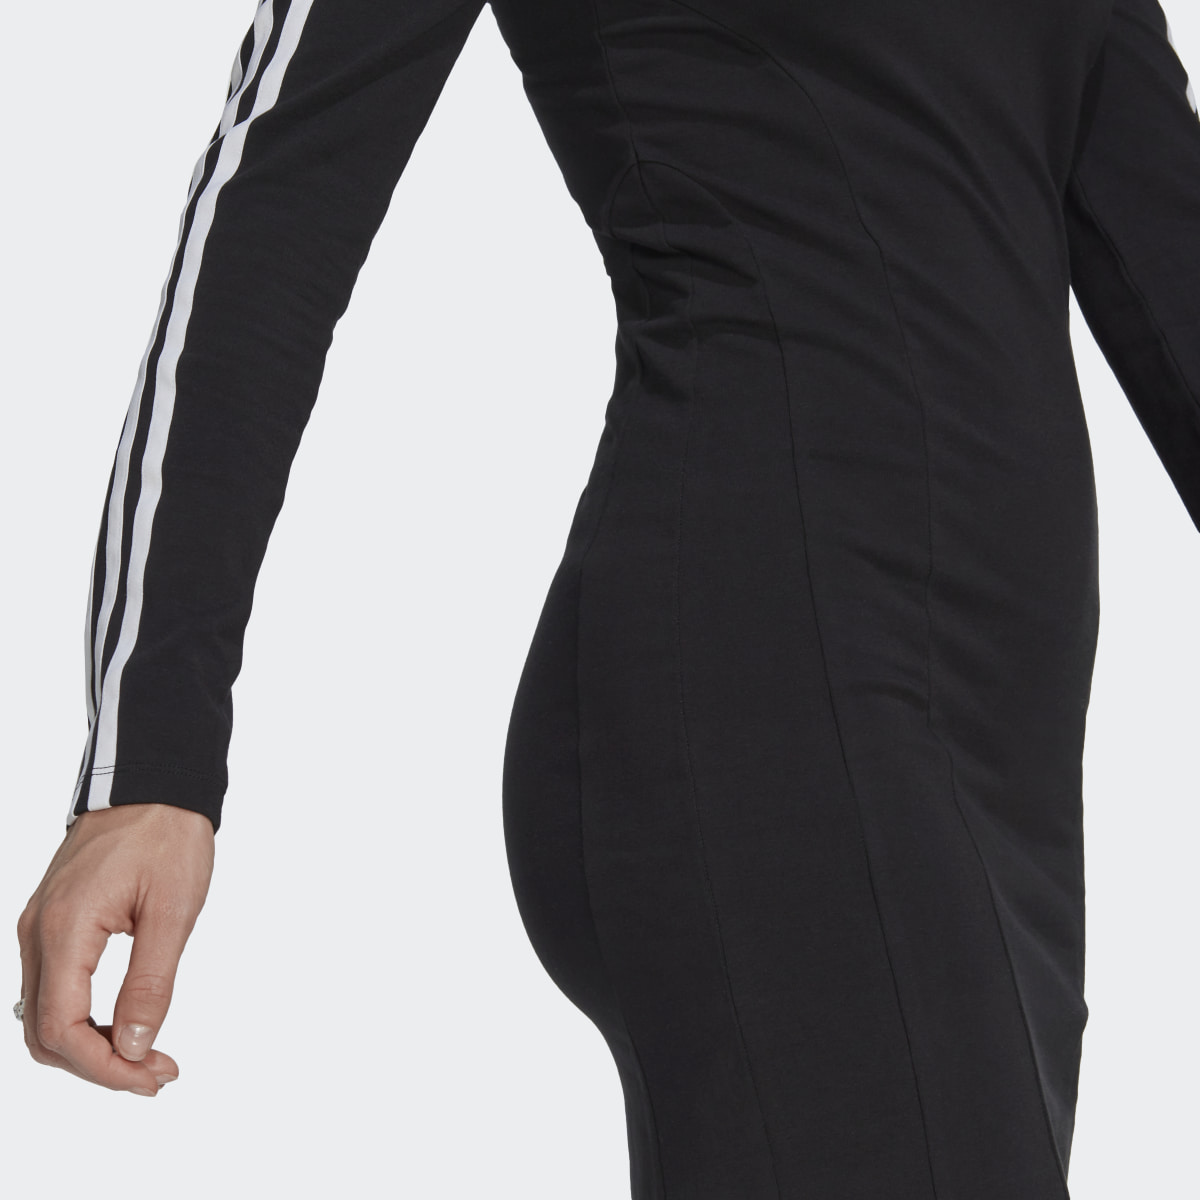 Adidas Centre Stage Cutout Long Sleeve Dress. 7